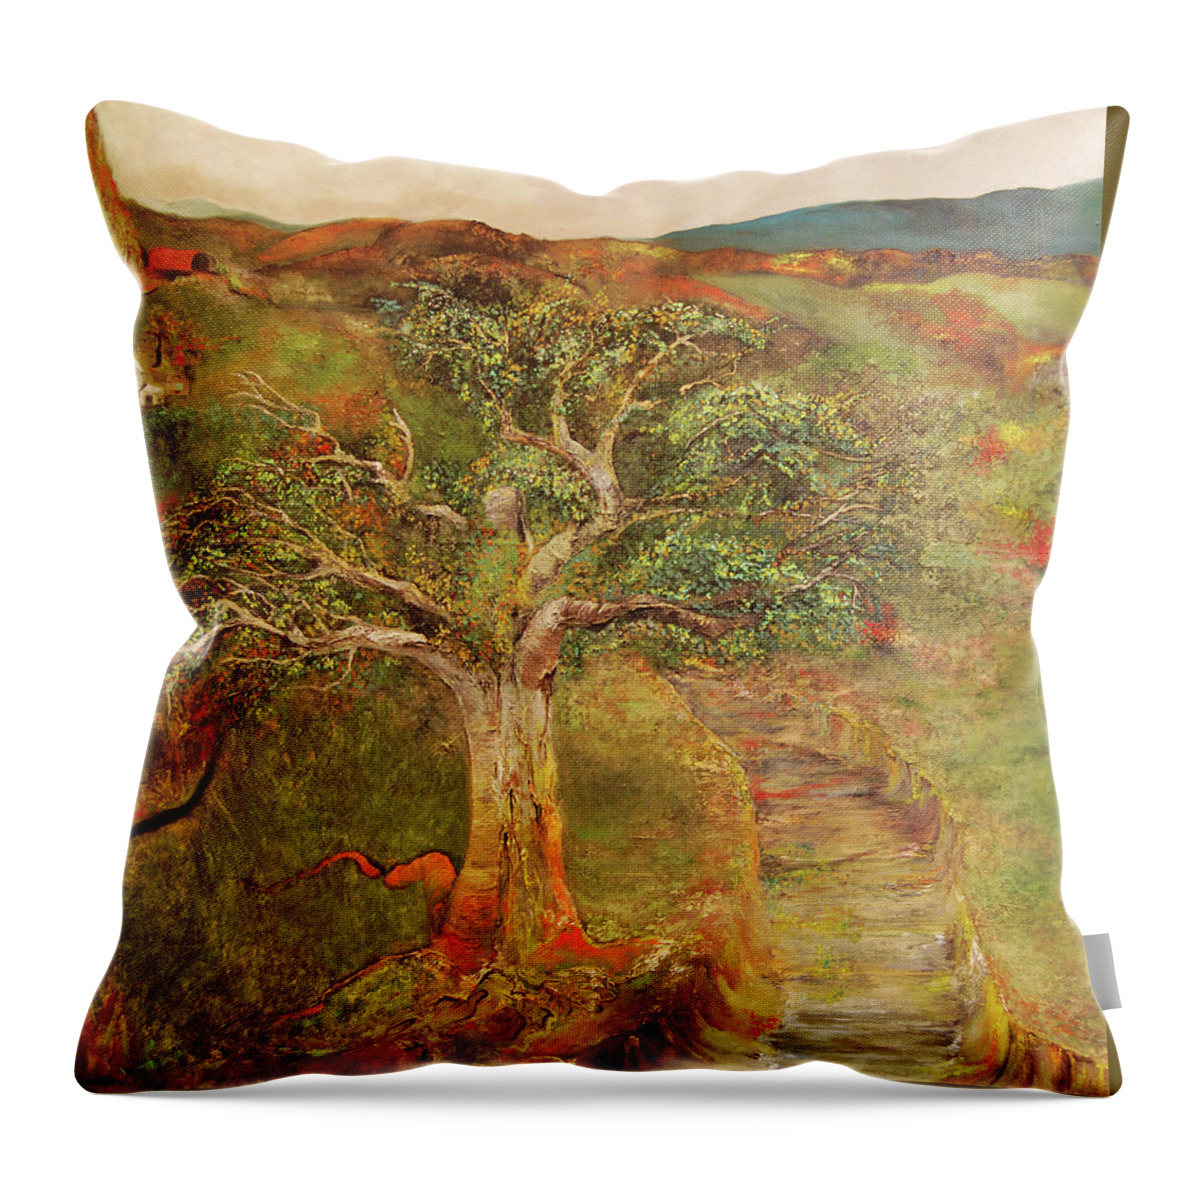 Landscape Throw Pillow featuring the painting Shenendoah Dream by Anitra Boyt